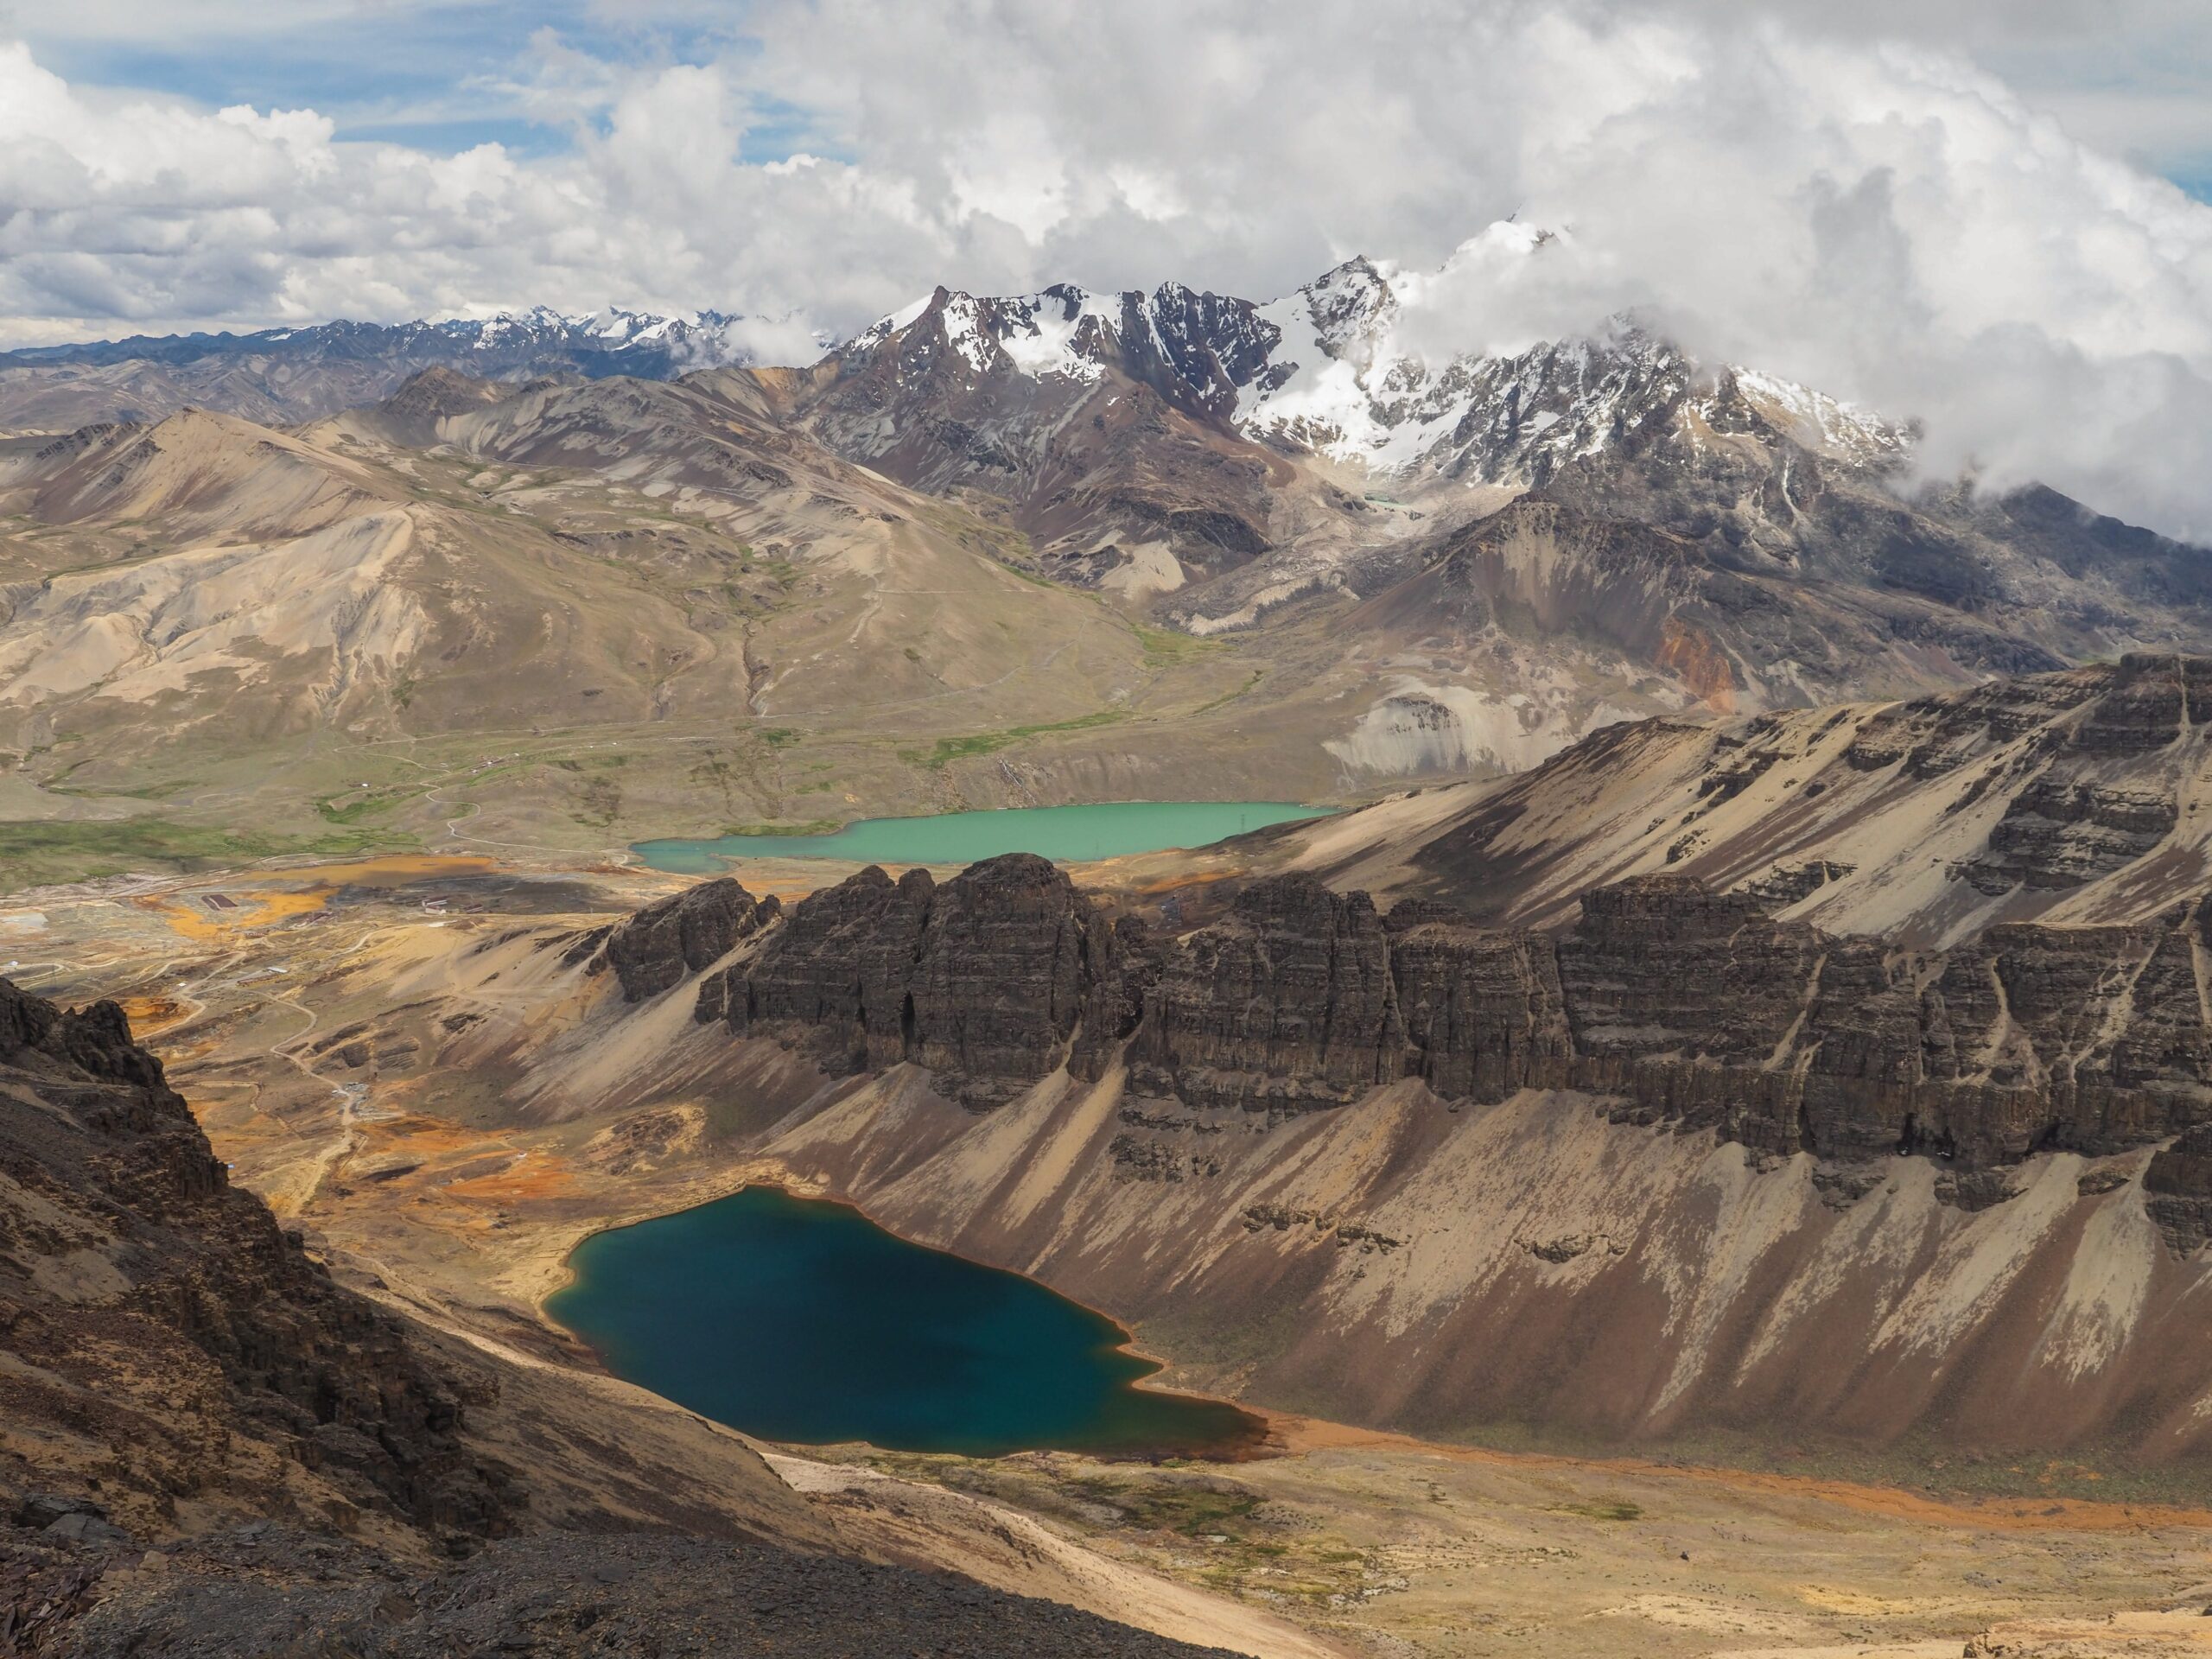 View from Chacaltaya at 4,300 meters, Near La Paz, Bolivia(1)